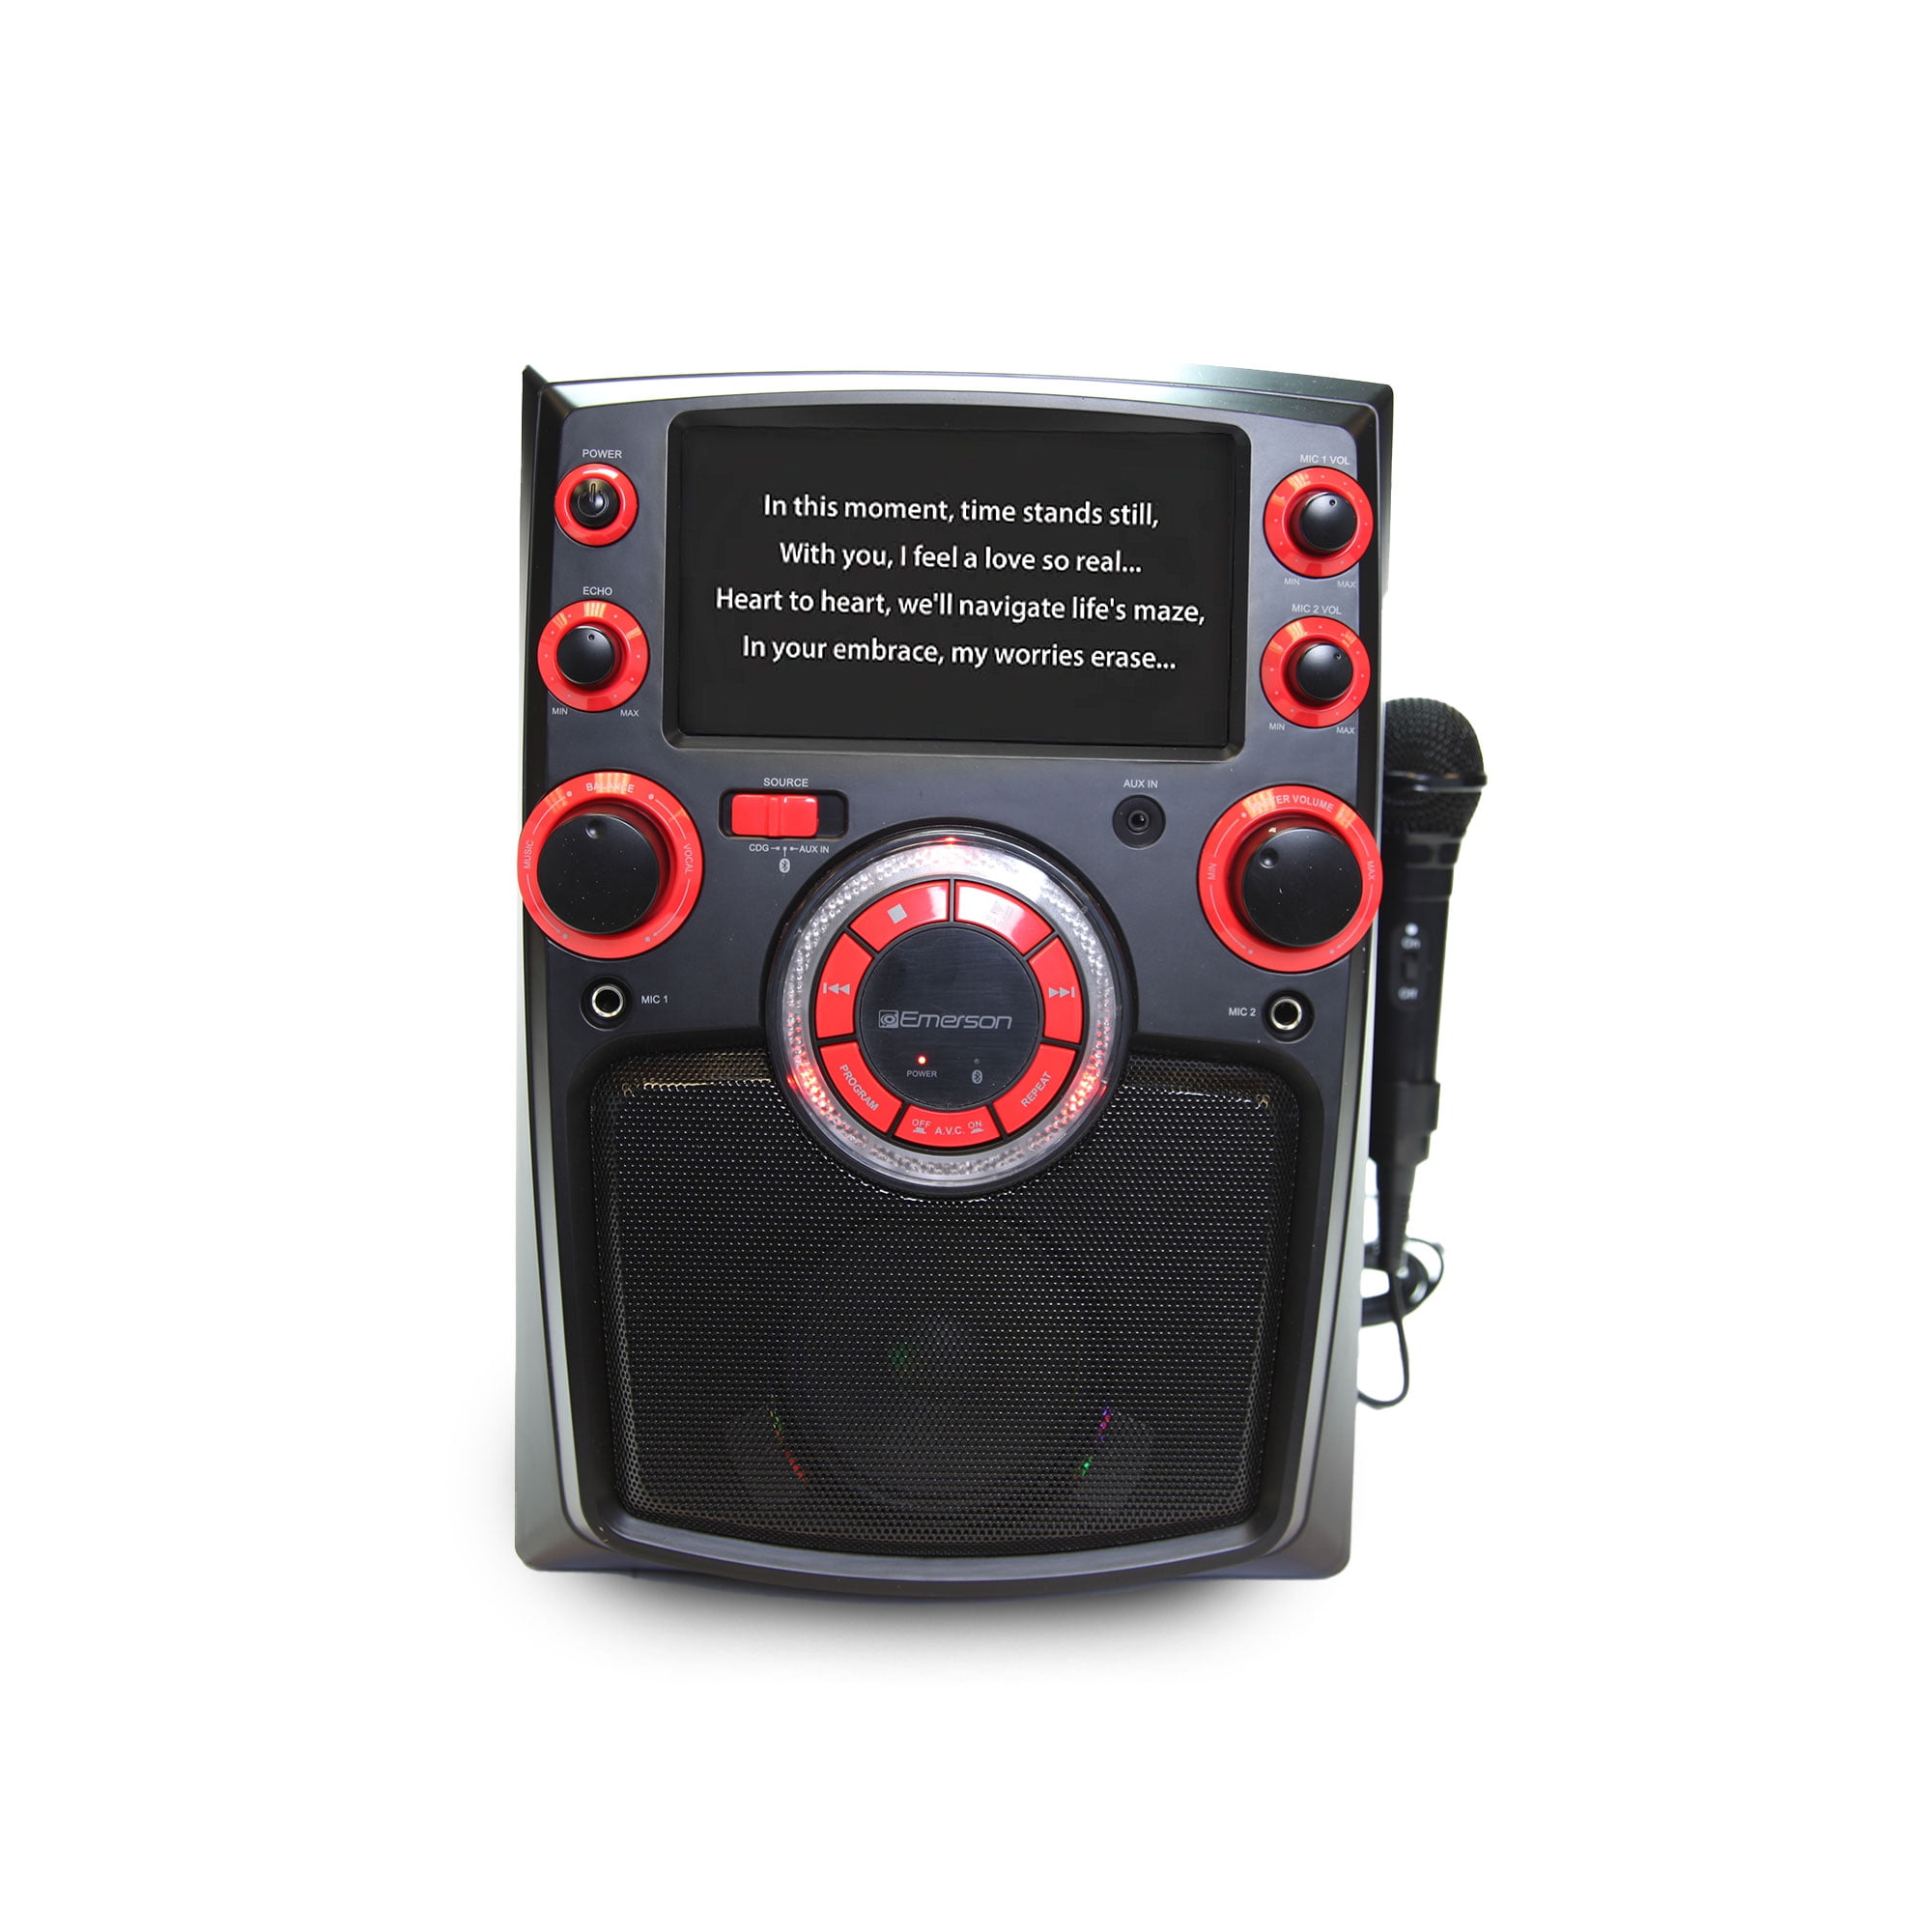 Picture of Naxa EK-6002 Emerson Portable Bluetooth Karaoke System with 7 in. LCD Display